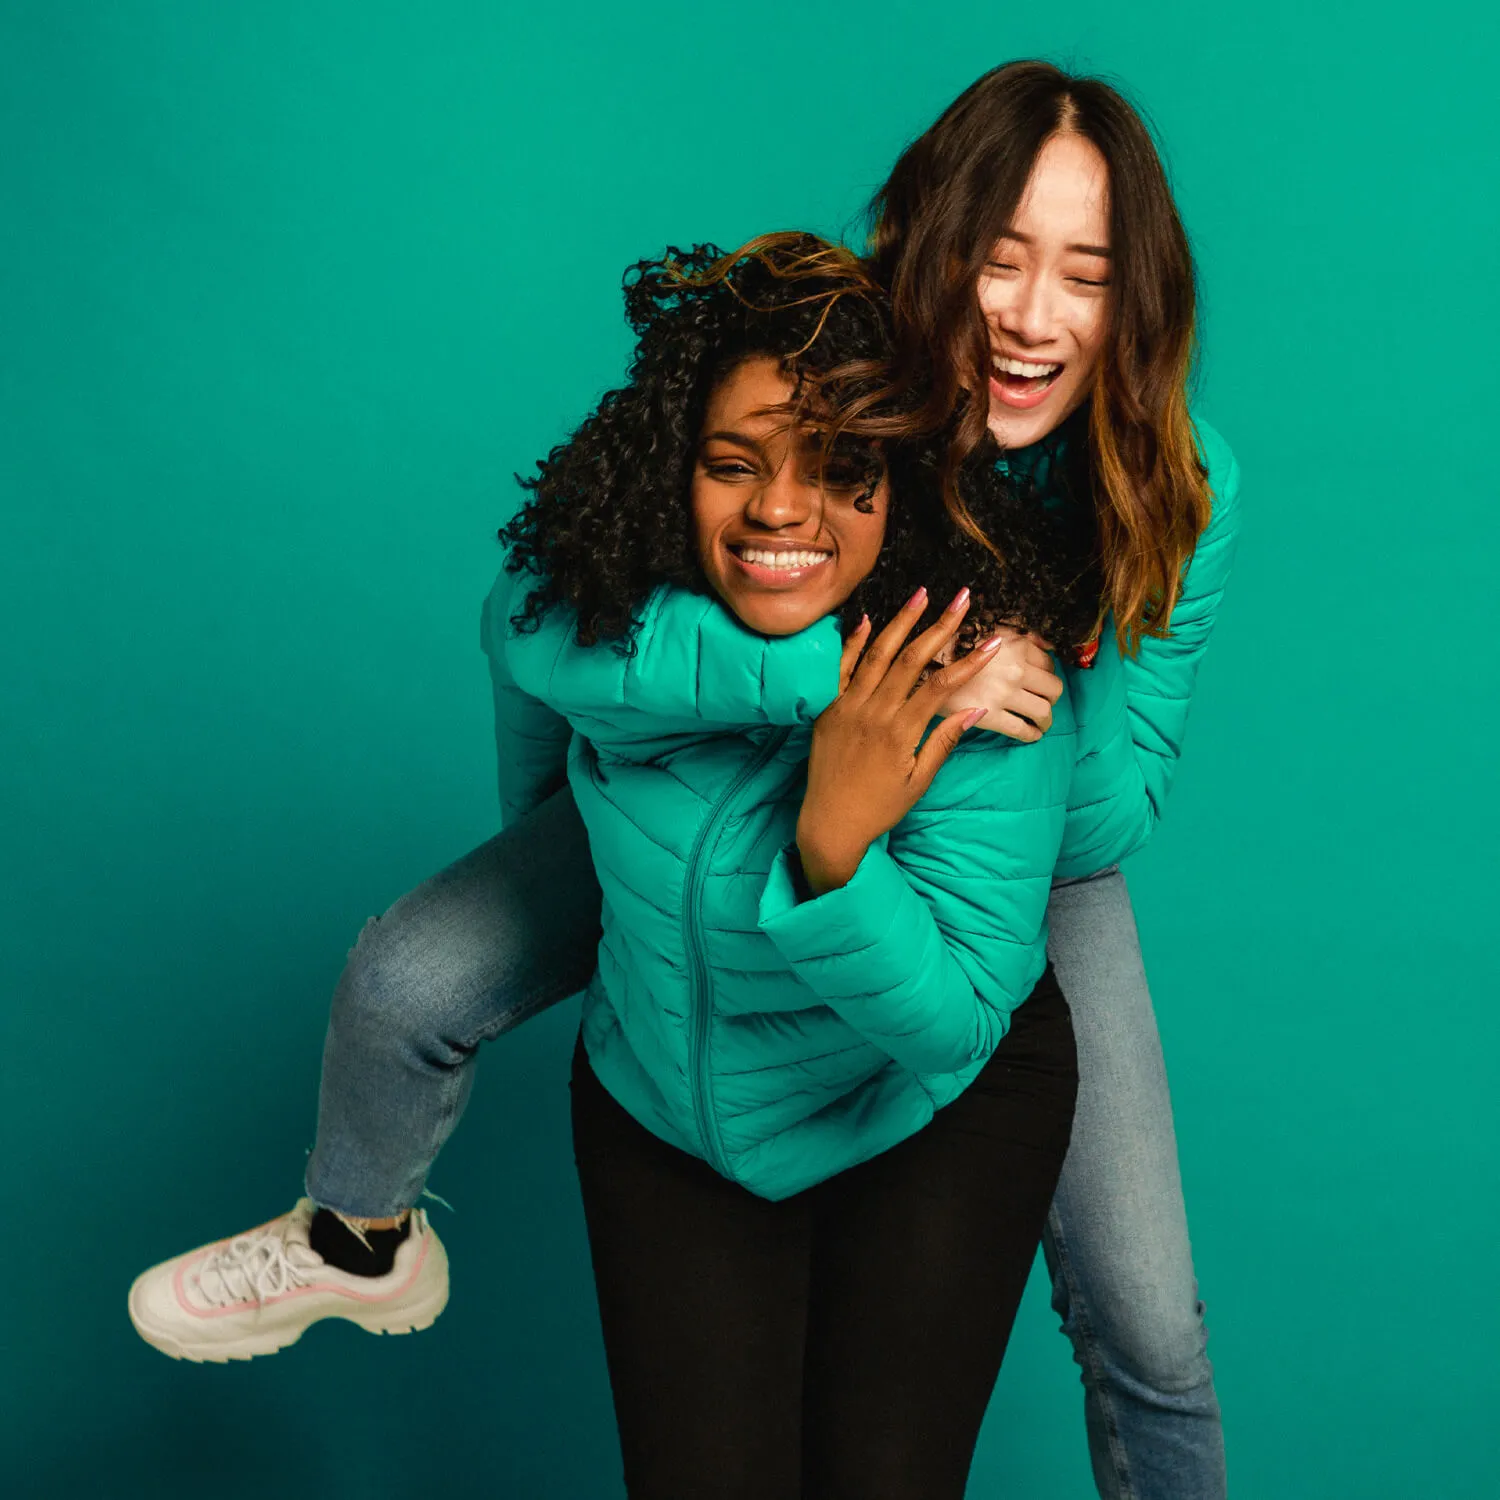 Black woman piggy backing Asian woman on a green background